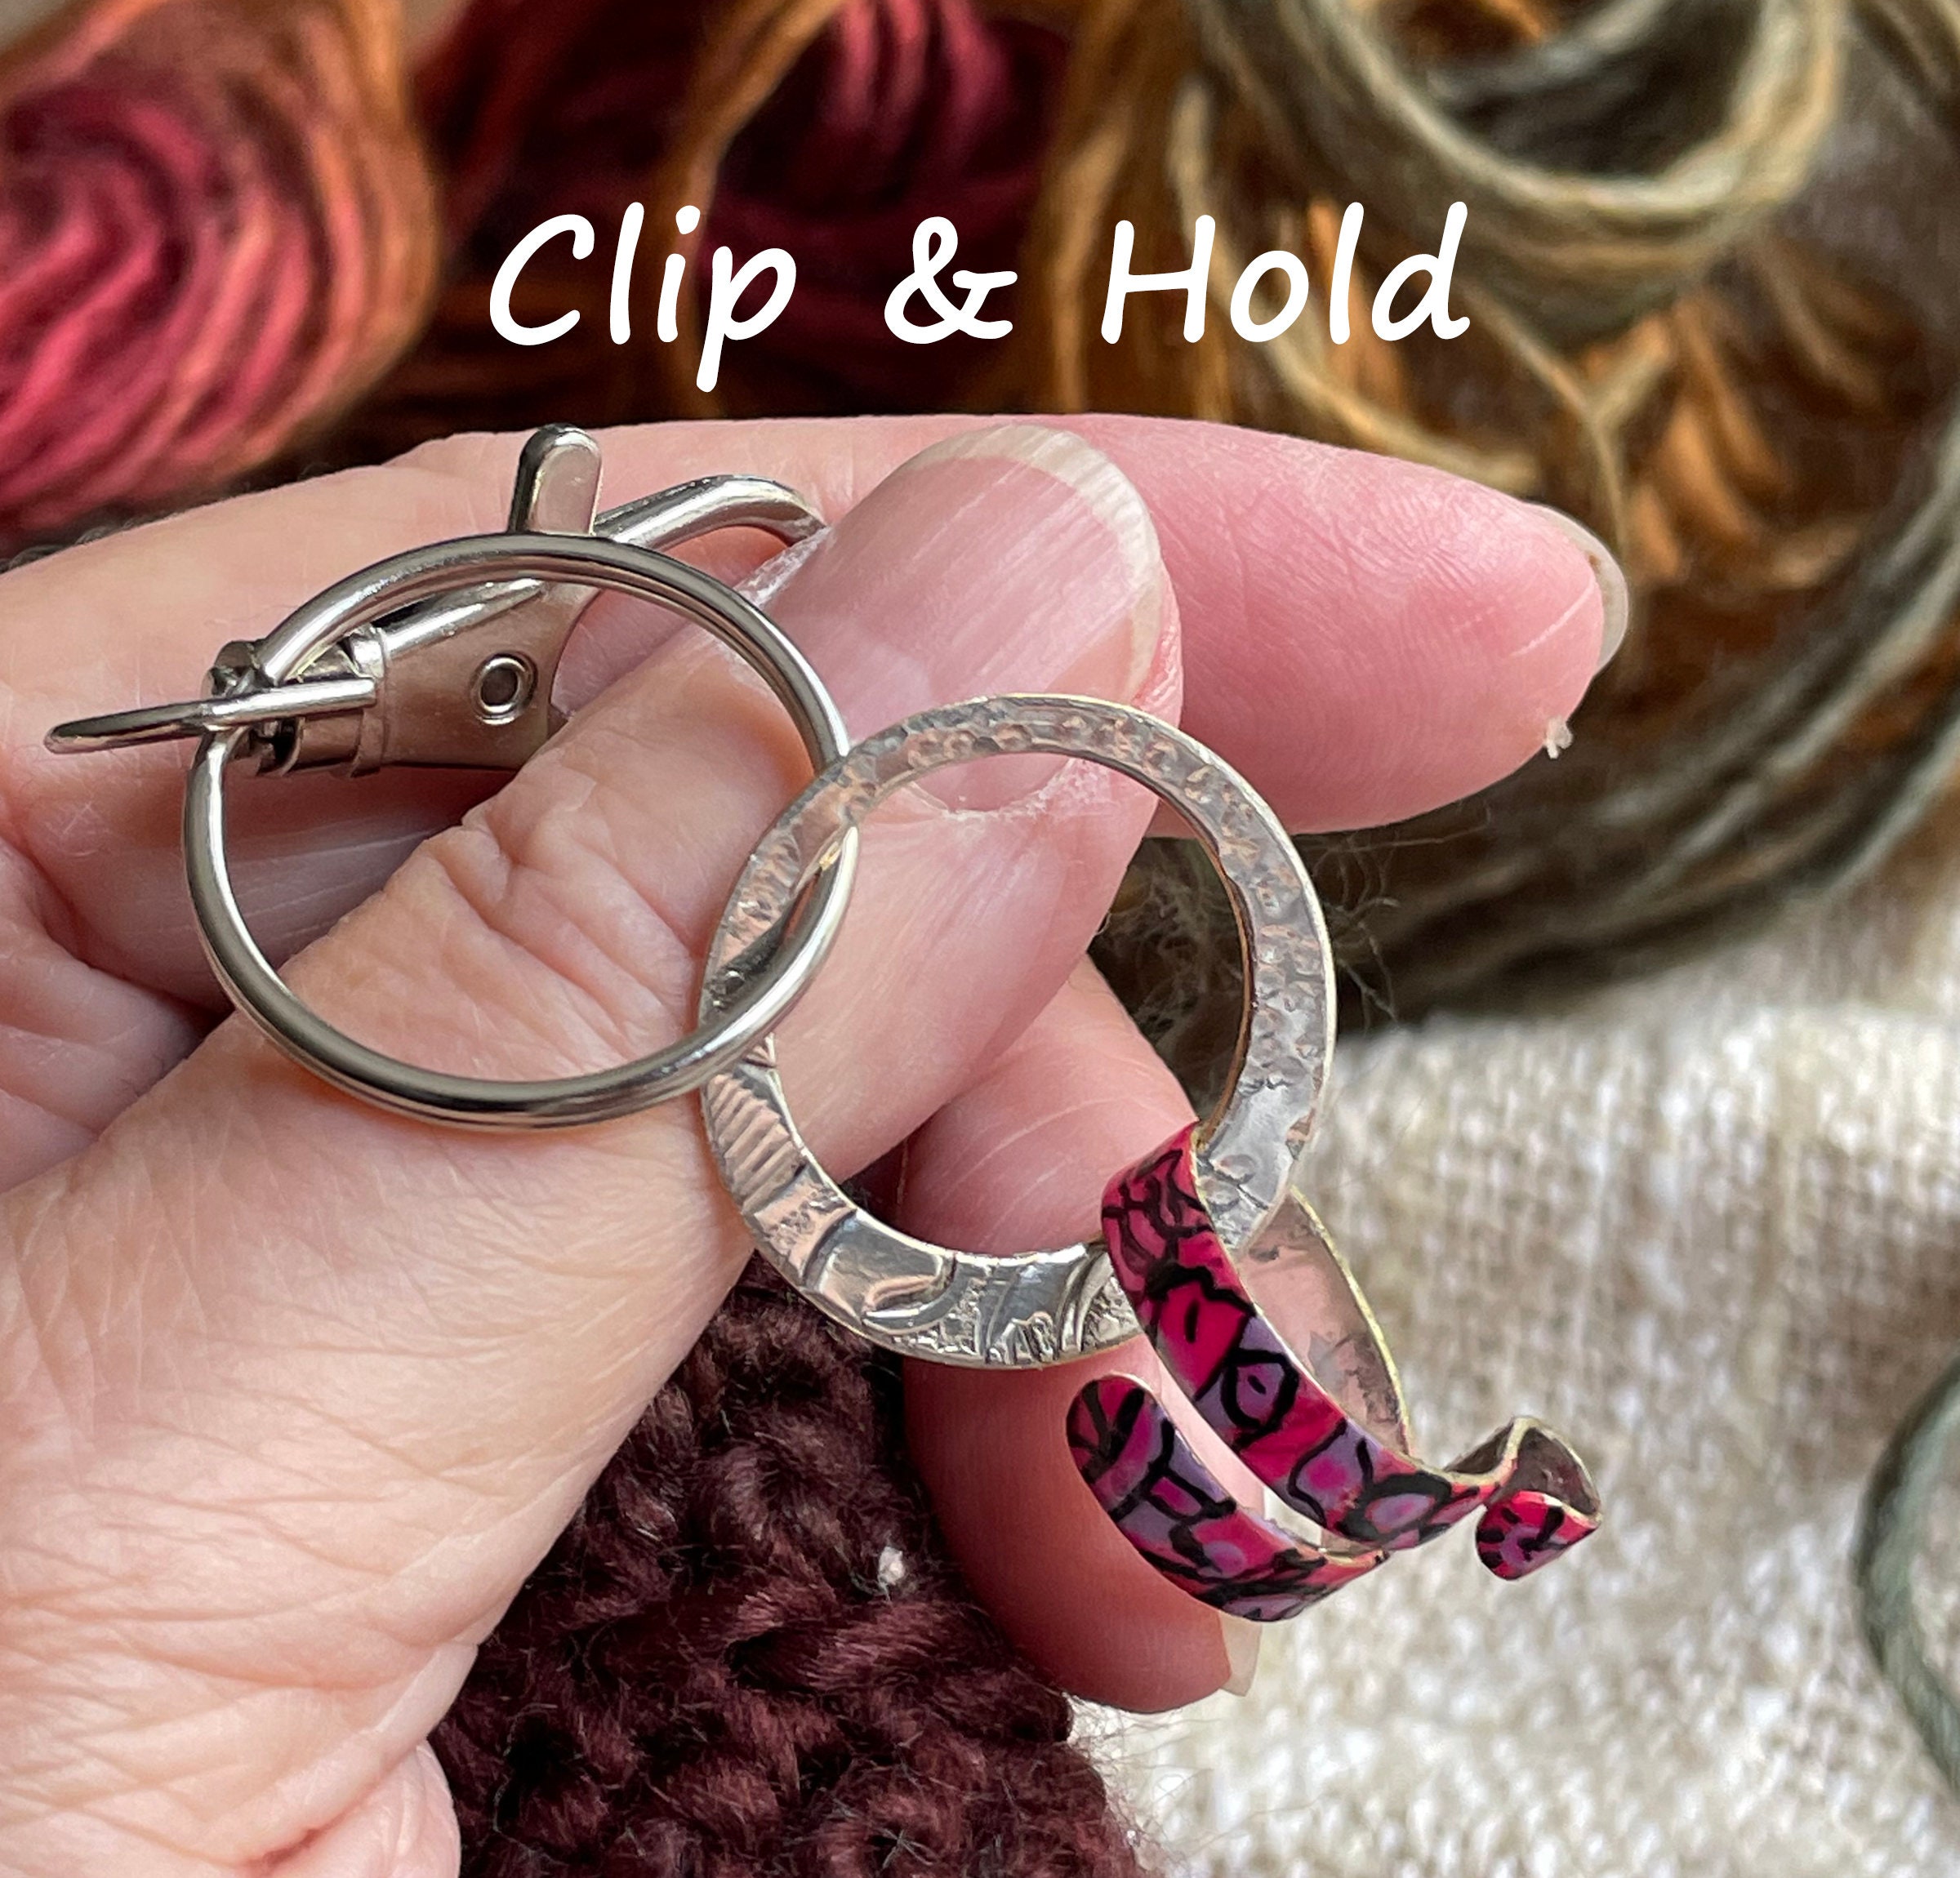 Original Crochet Rings Are Great for Arthritic Relief While